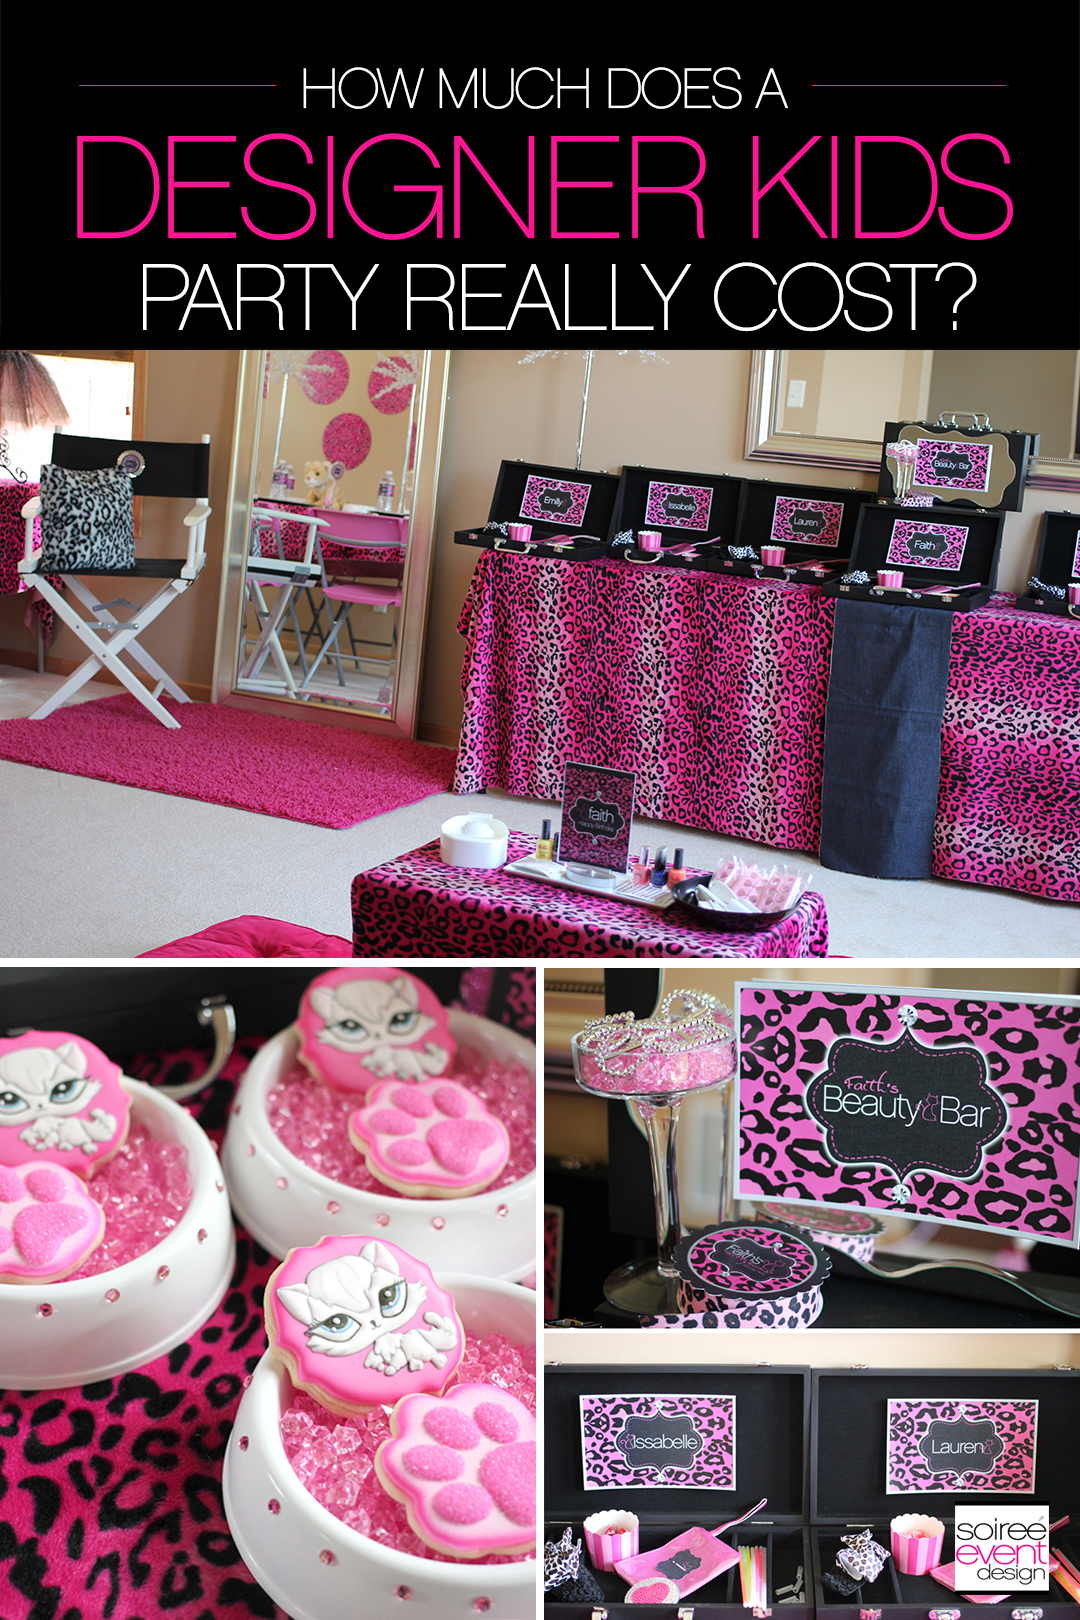 Supplement Cerebrum Matron How much does a designer kids party REALLY cost? - Soiree Event Design